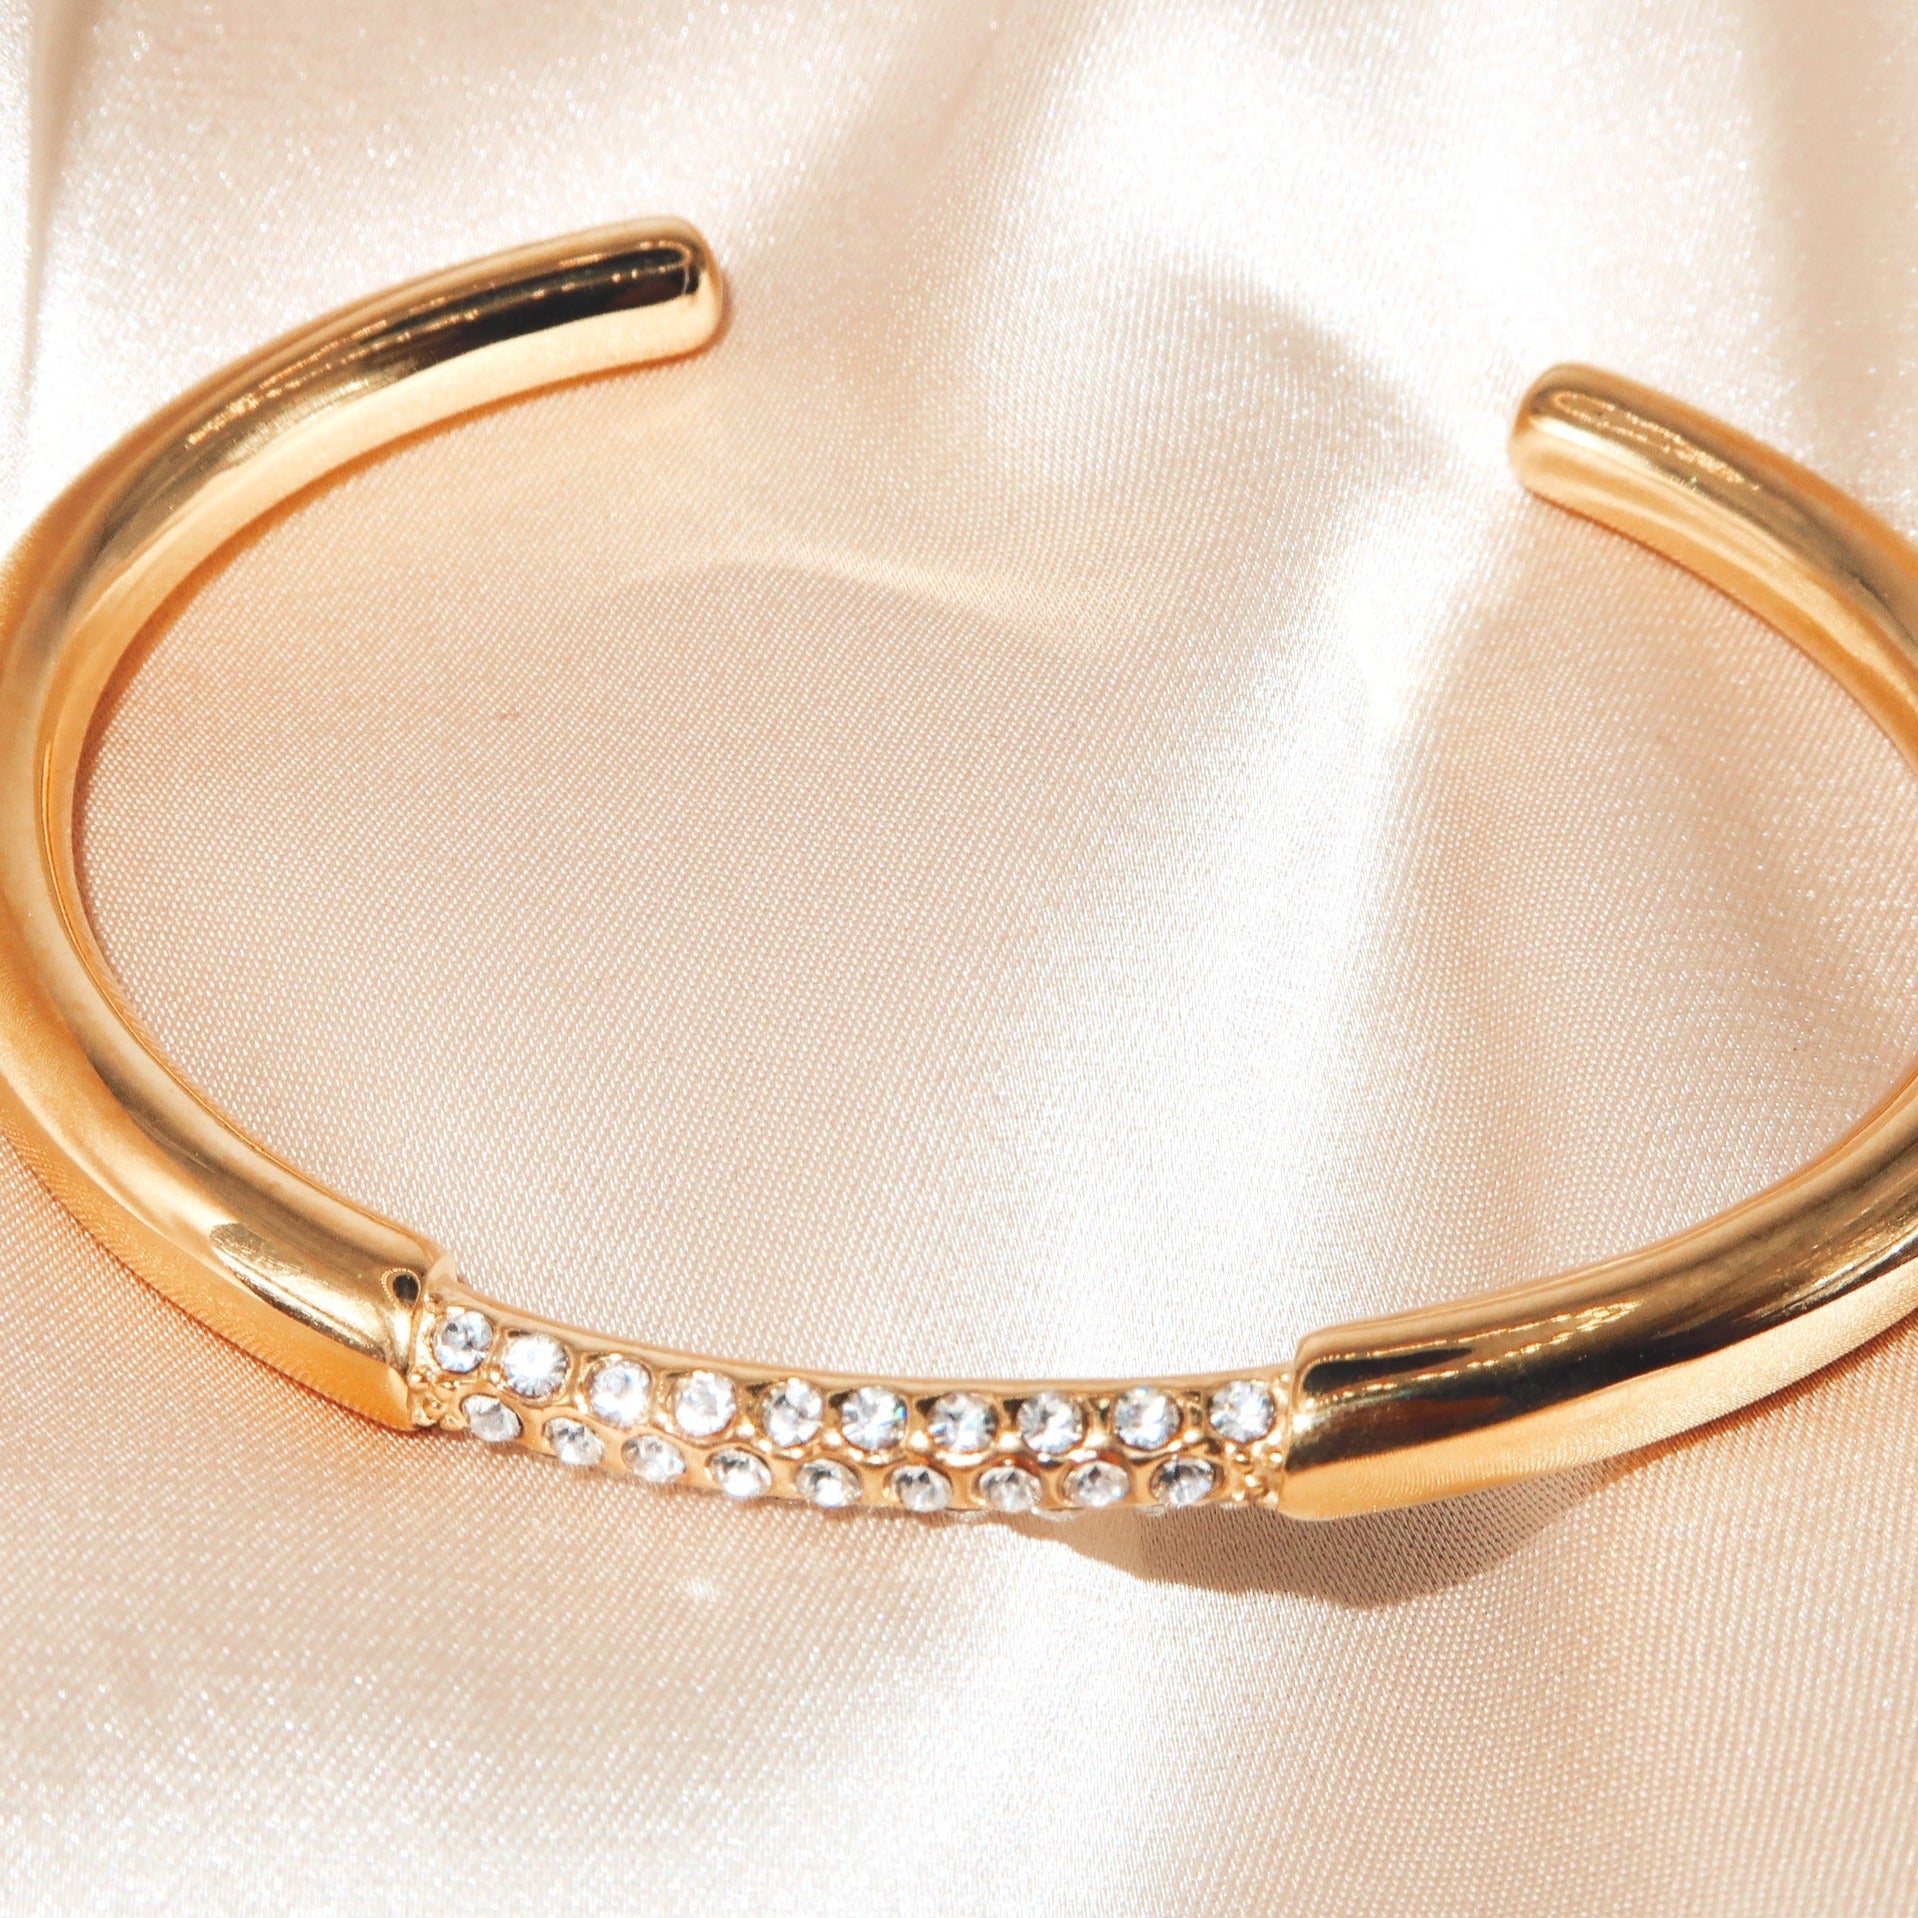 LEX - 18K PVD Gold Plated Adjustable Cuff with CZ Stones - Mixed Metals